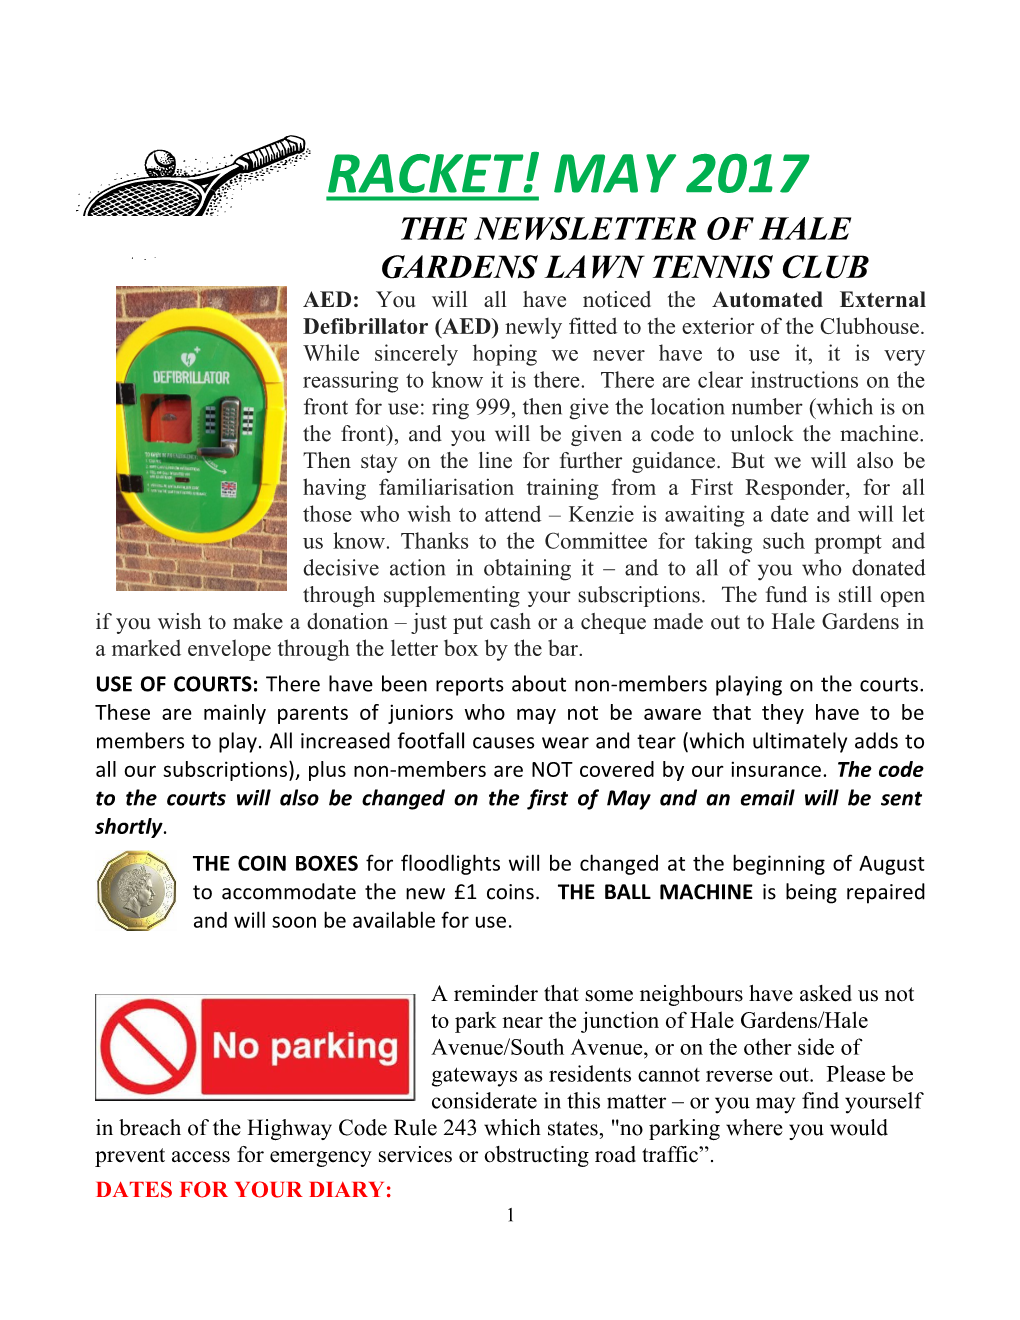 The Newsletter of Hale Gardens Lawn Tennis Club